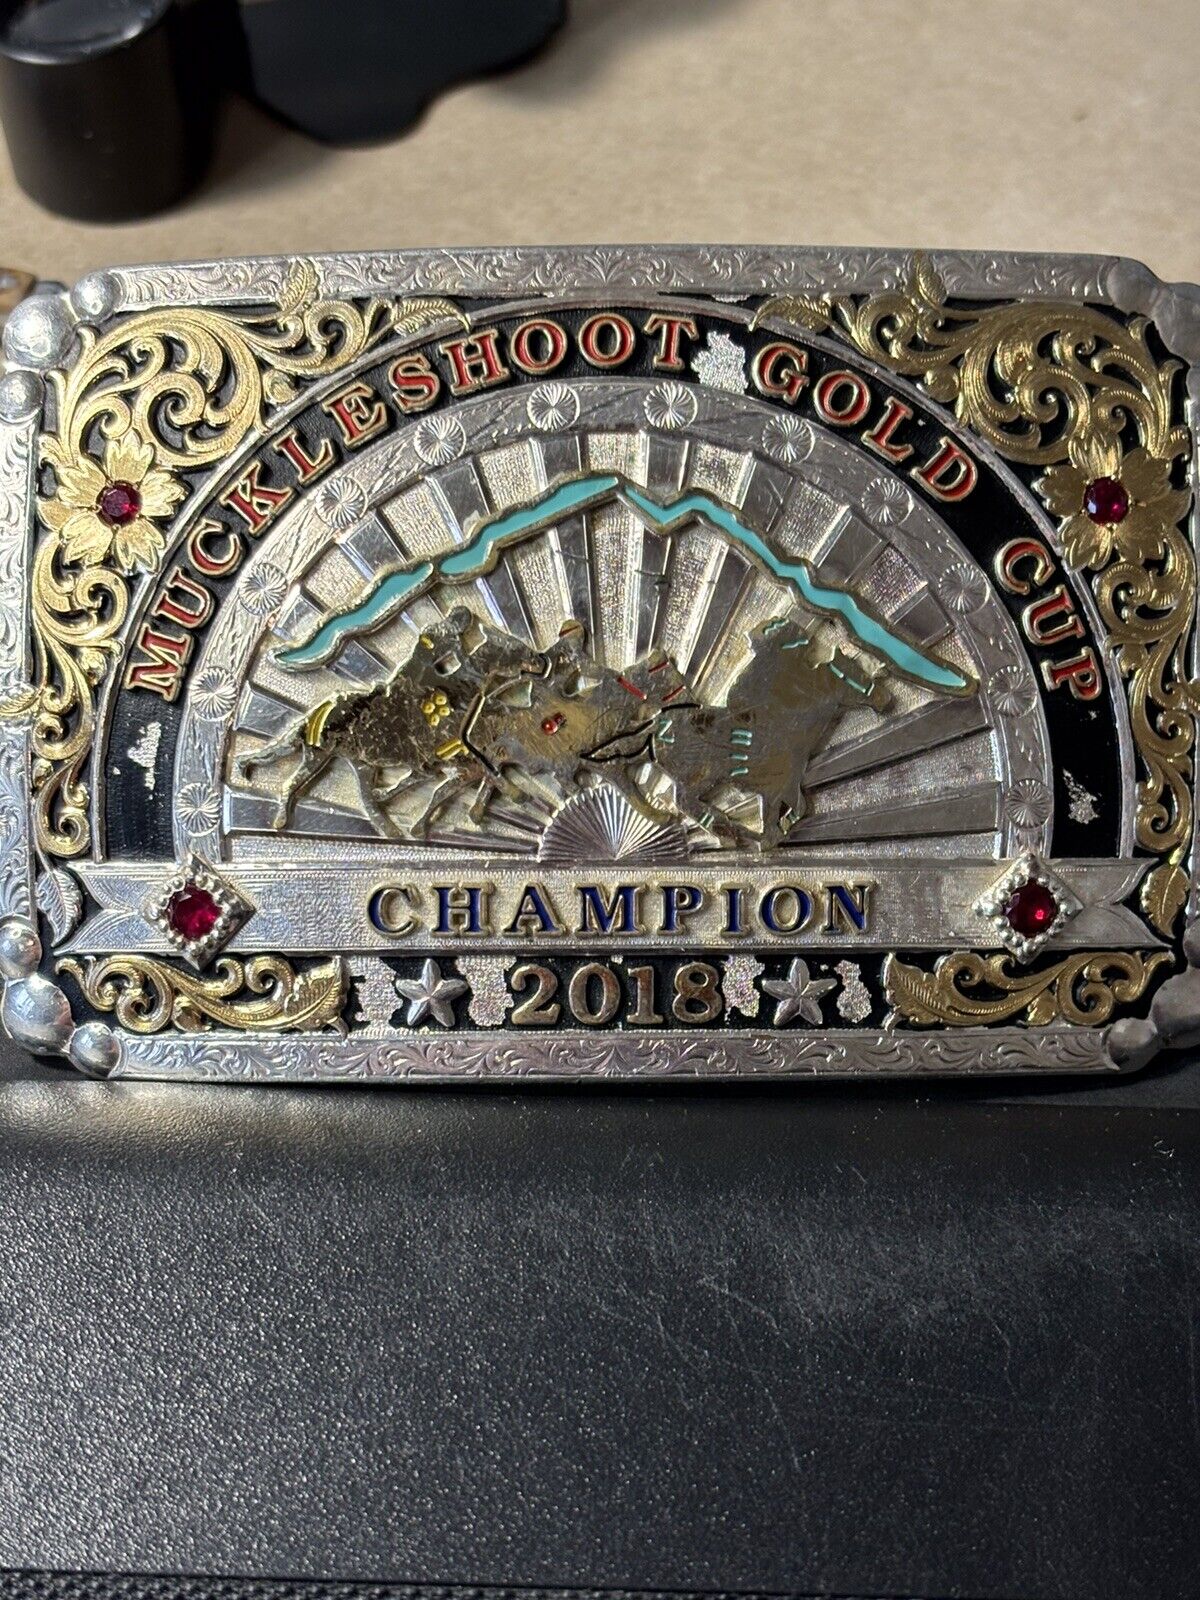 AUTHENTIC  2018 MUCKLESHOOT GOLD CUP CHAMPION BELT BUCKLE WITH RUBY GEMSTONES